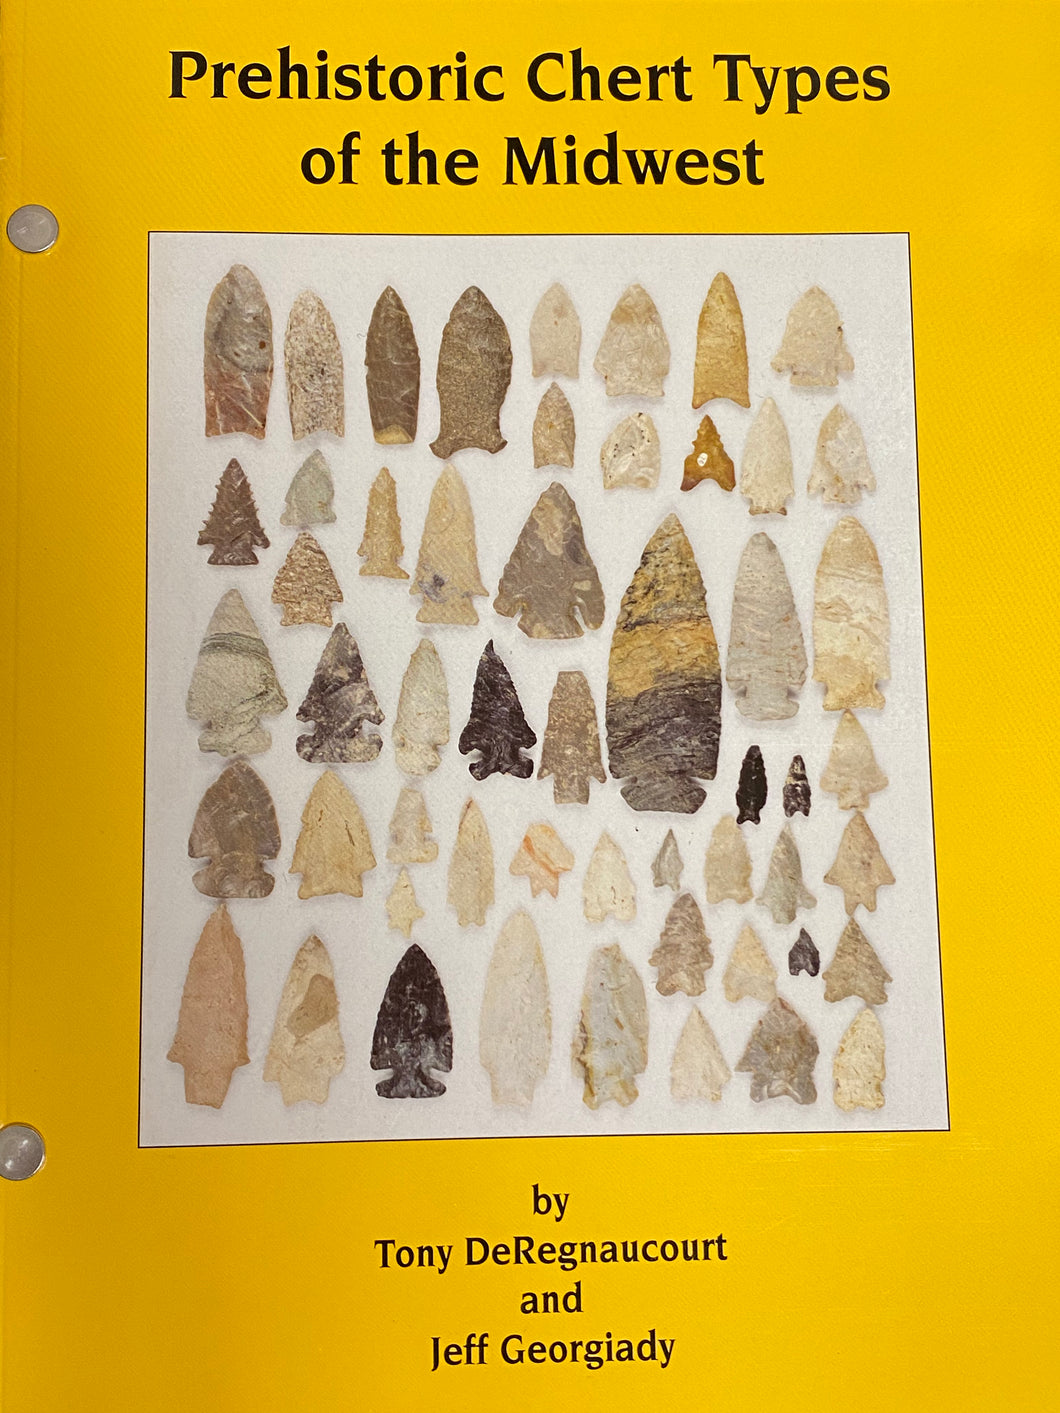 “Prehistoric Chert Types of the Midwest” by Tony DeRegnaucort and Jeff Georgiady